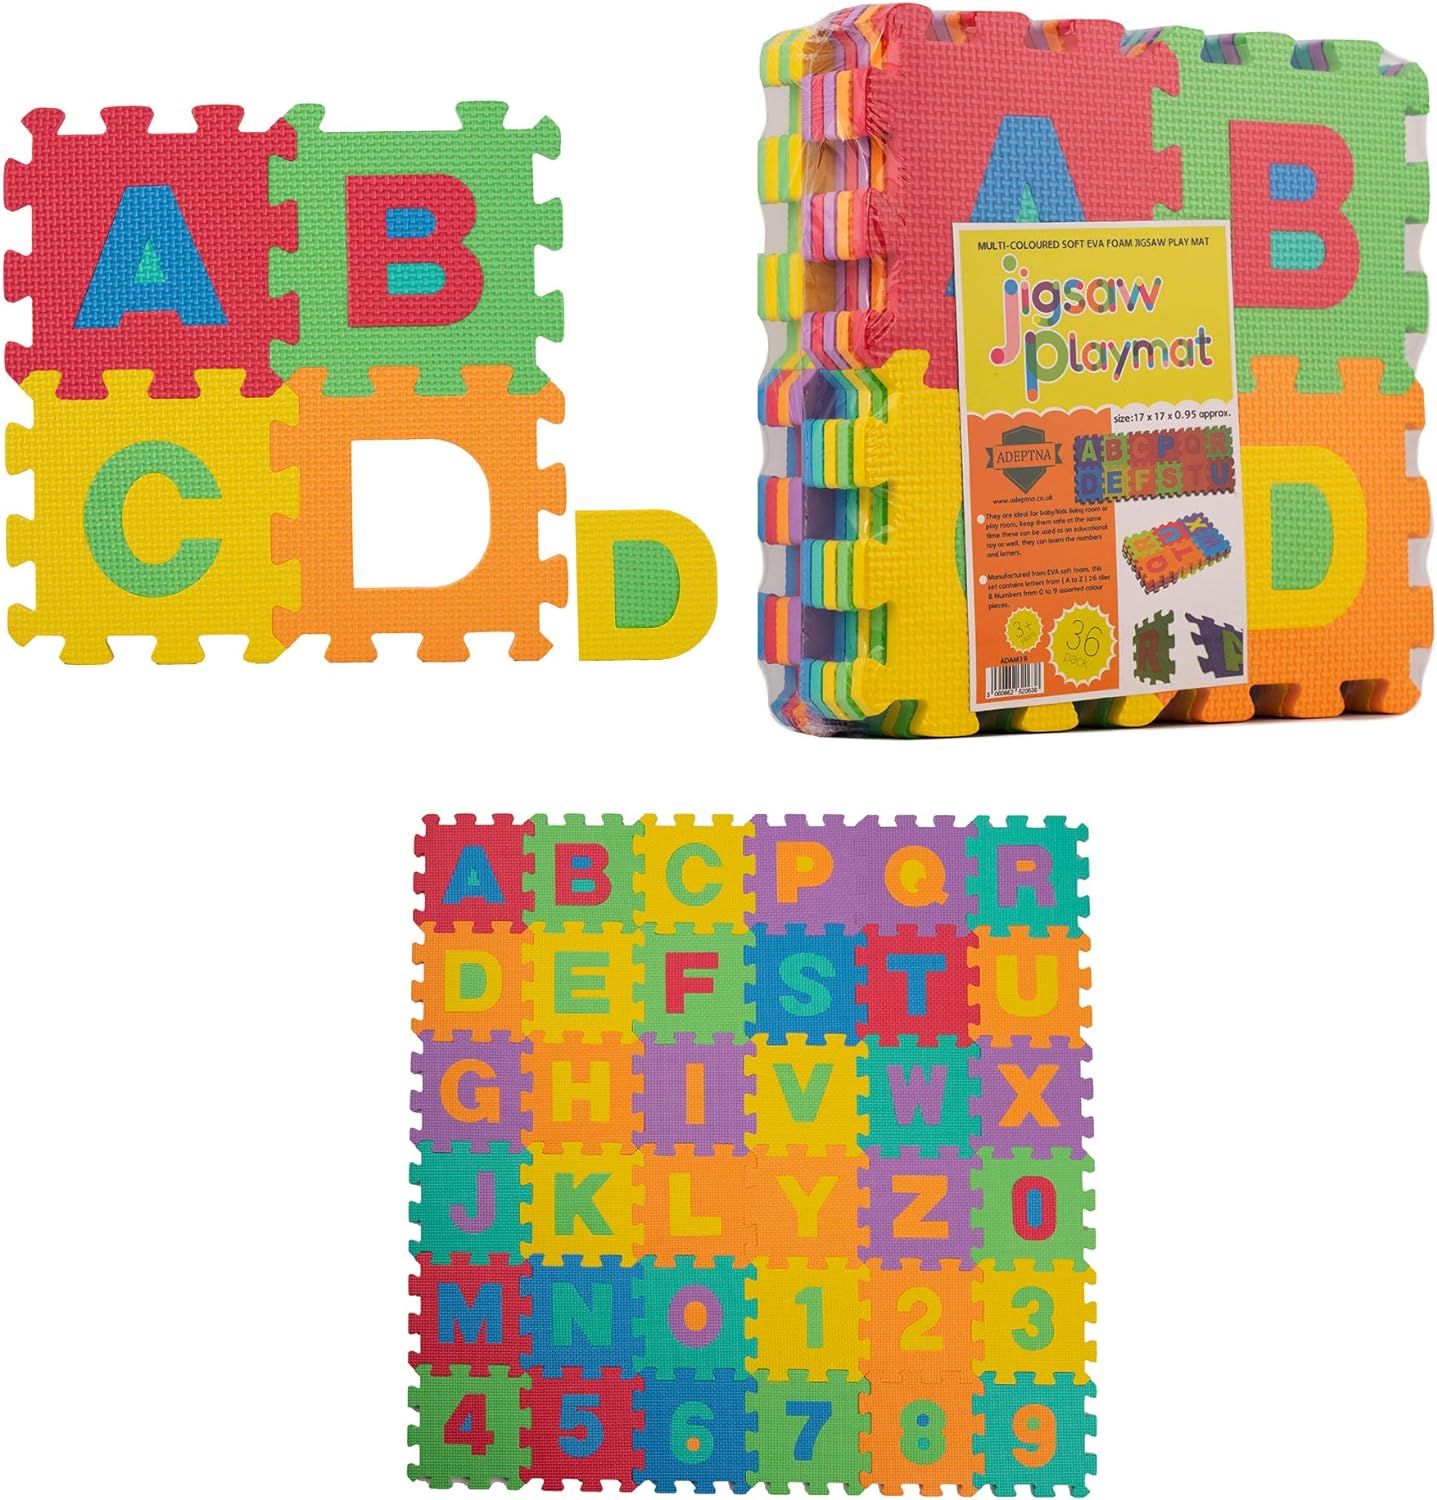 ADEPTNA 36 PCS MULTI-COLOURED SOFT EVA FOAM JIGSAW PLAY MAT LETTERS AND NUMBERS